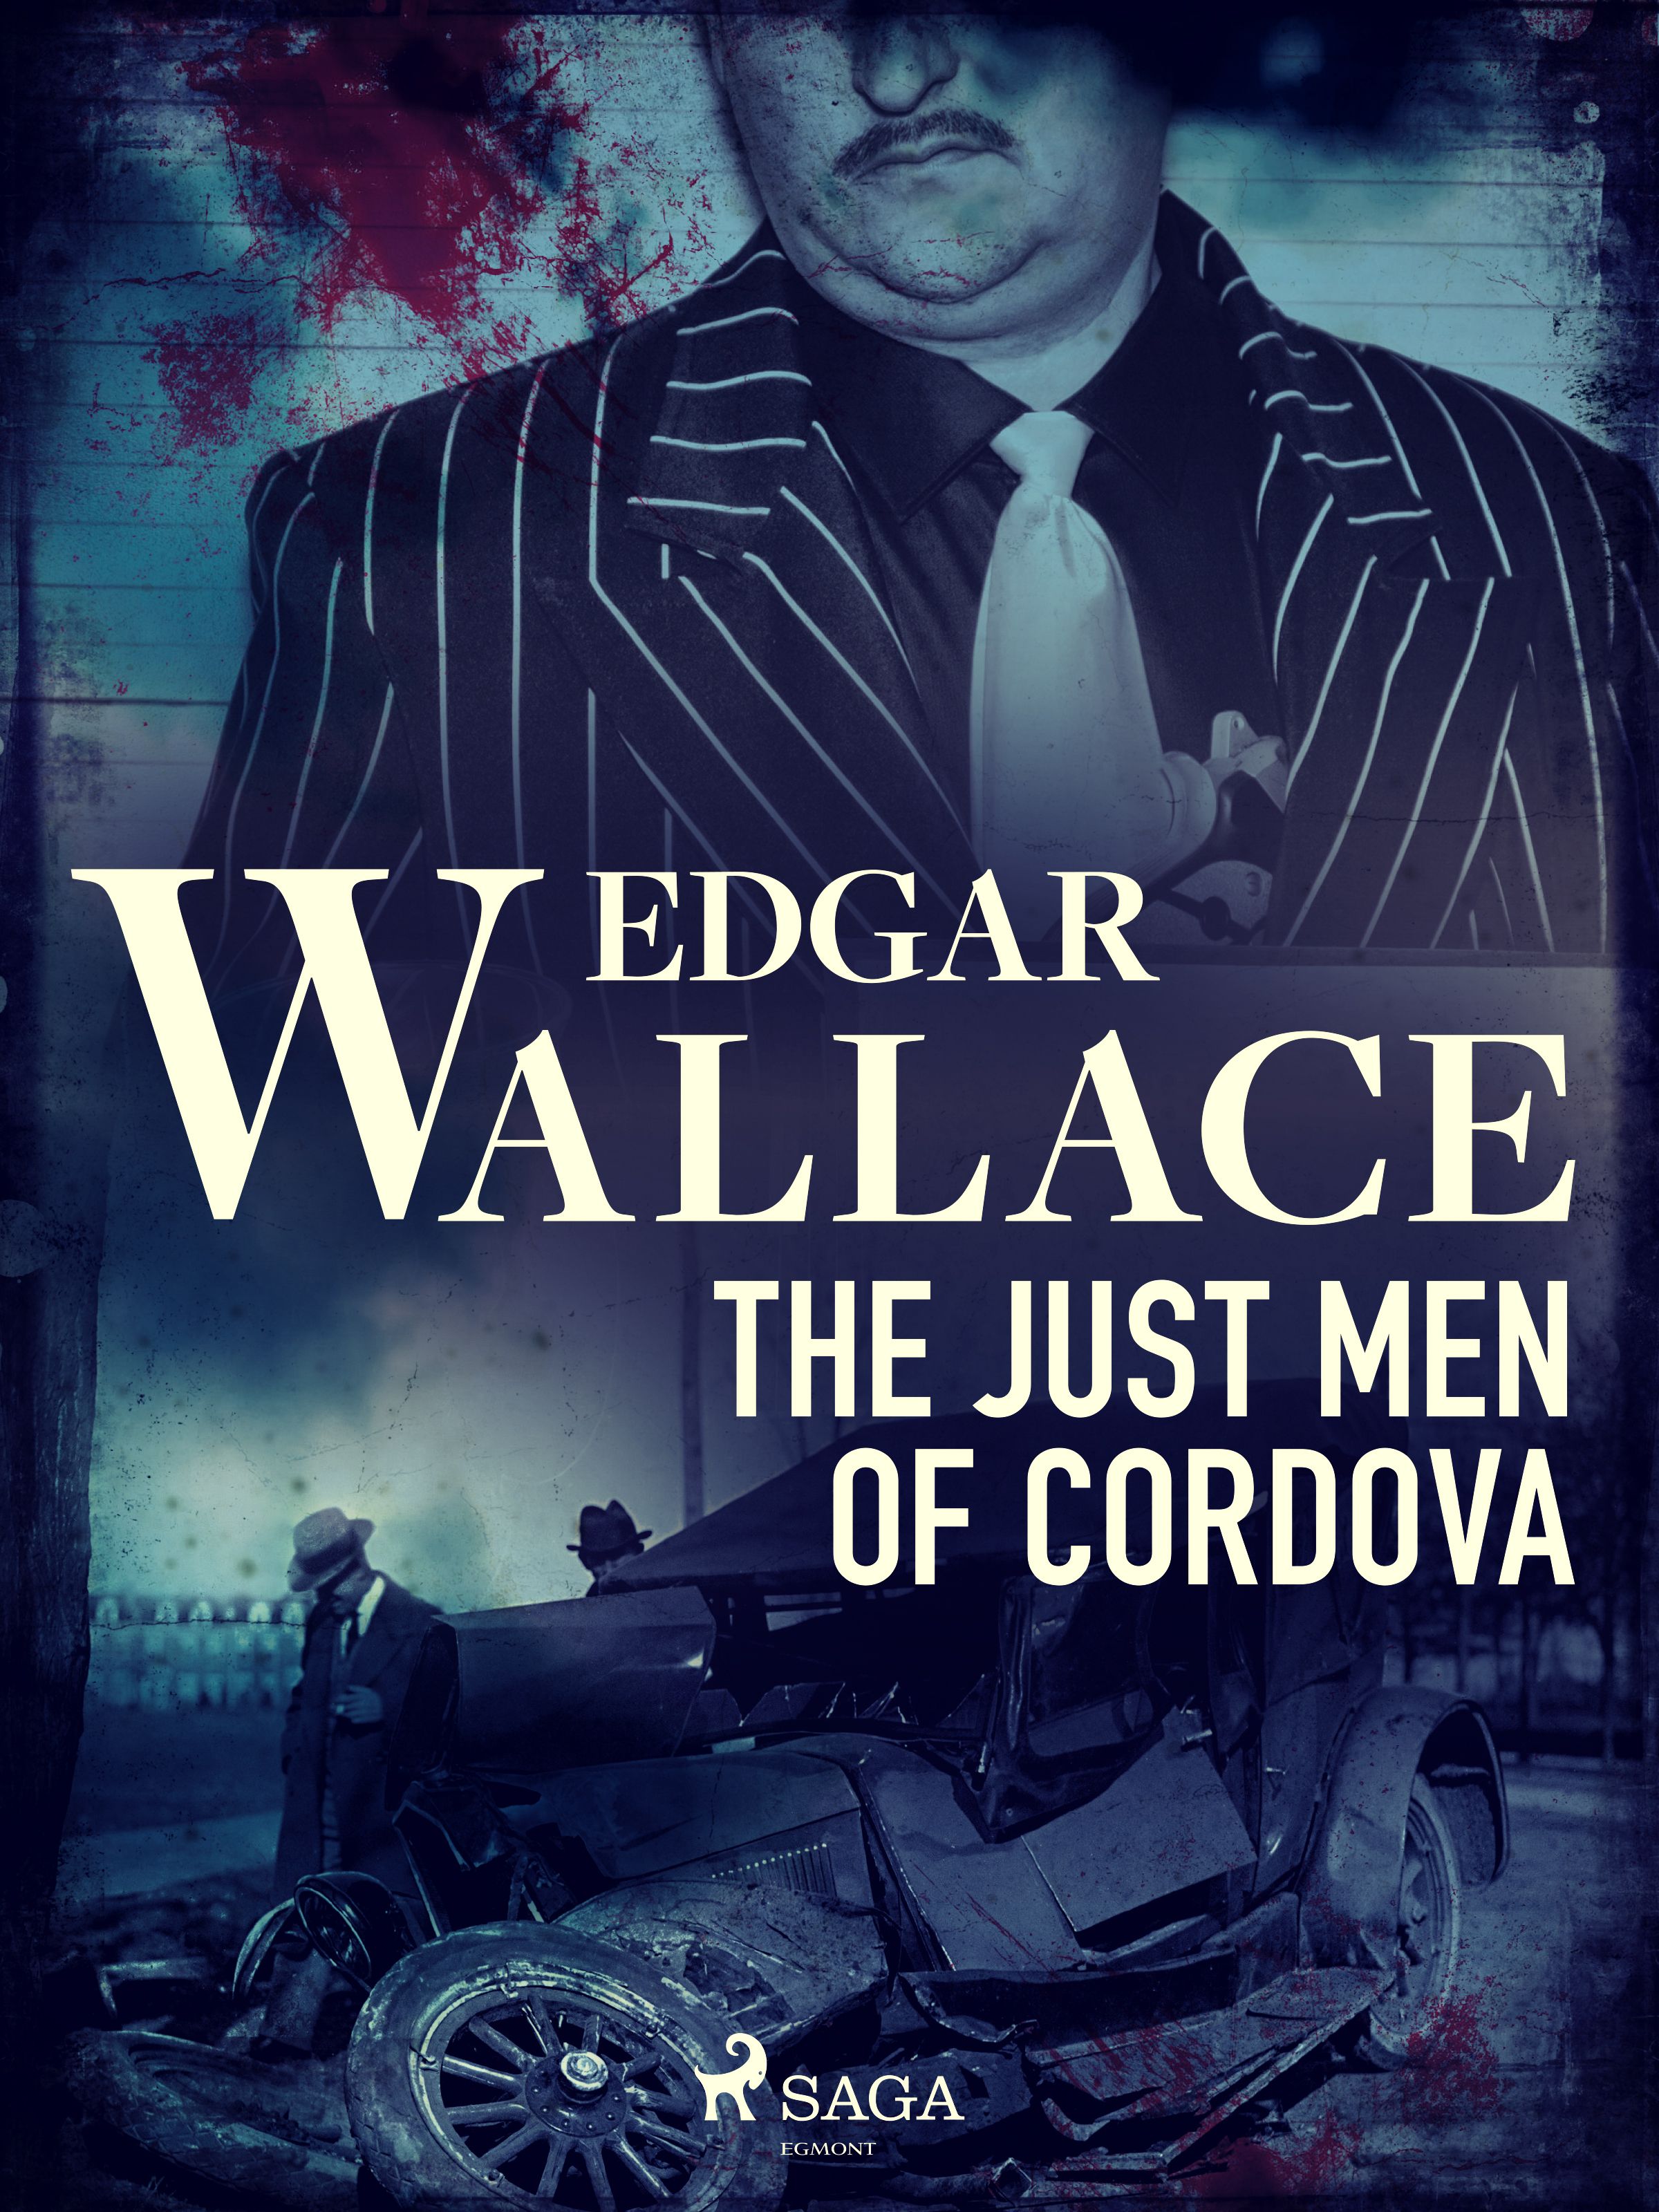 The Just Men of Cordova, eBook by Edgar Wallace